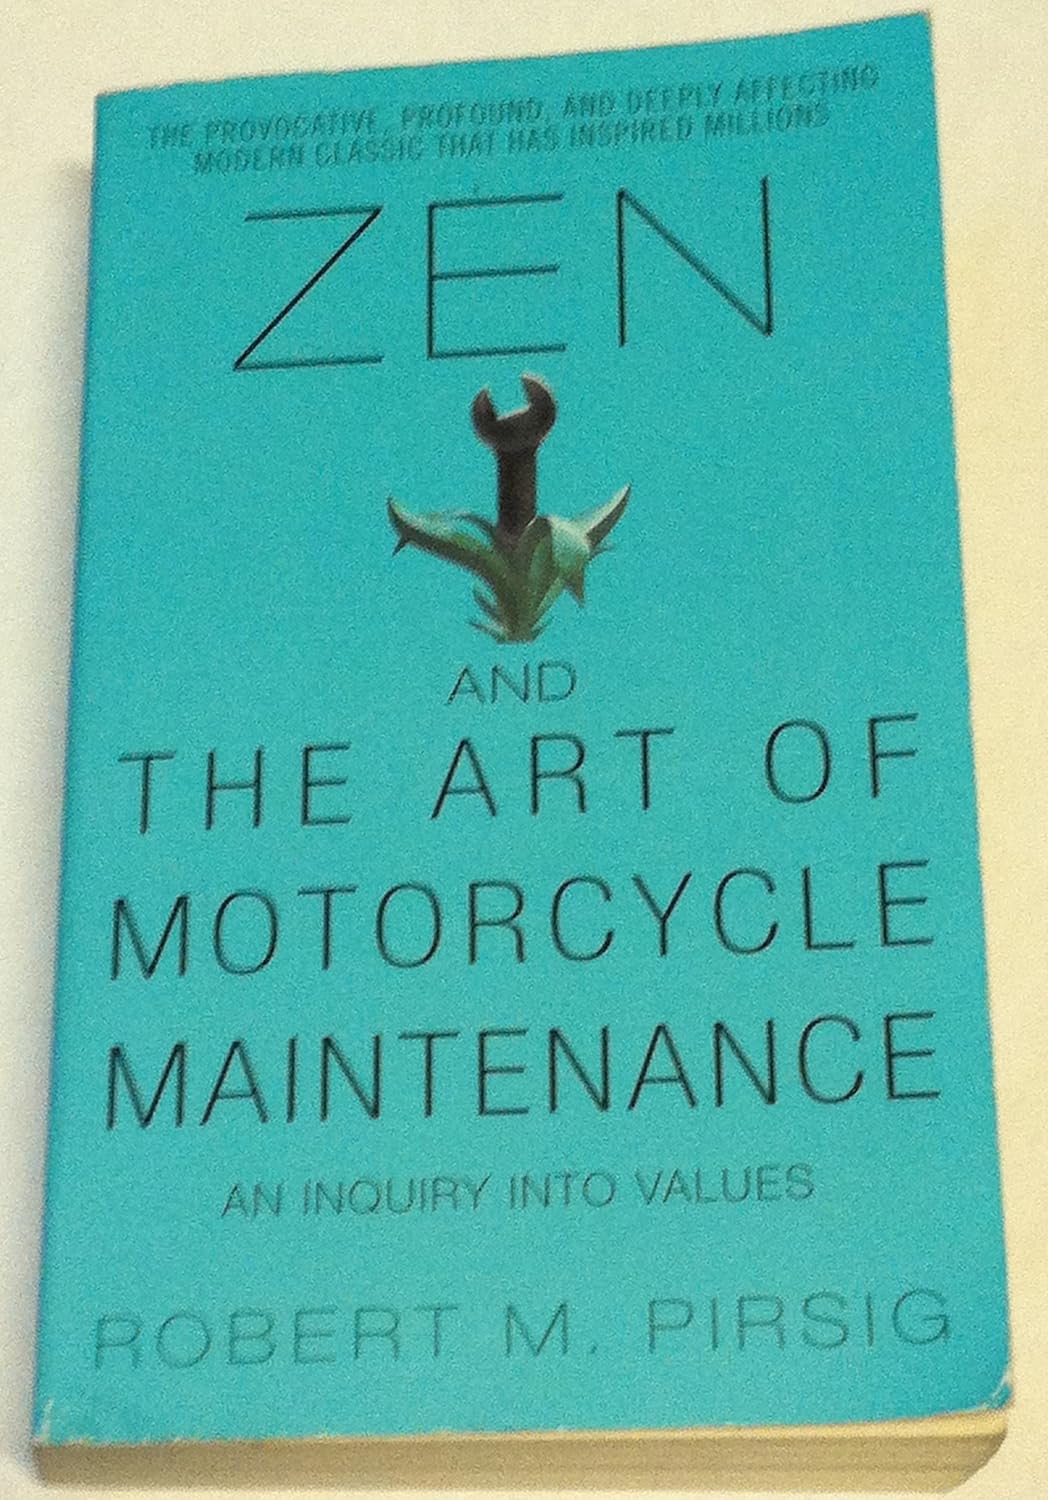 Zen and the Art of Motorcycle Maintenance An Inquiry Into Values – Robert M. Pirsig